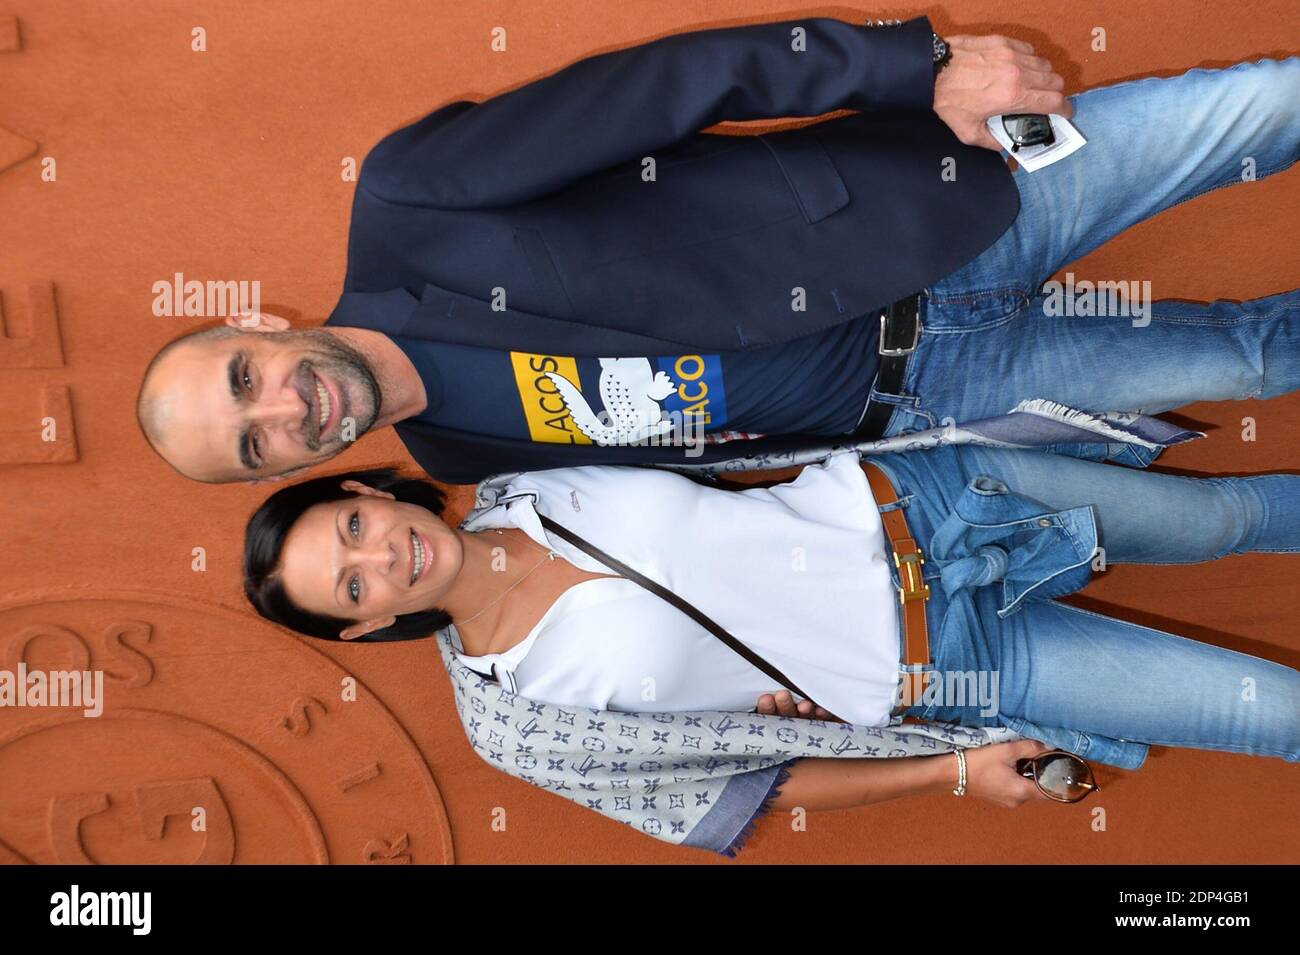 Jerome Alonzo and girlfriend posing at the Village during French Tennis Open at Roland Garros arena in Paris, France on June 3rd, 2015. Photo by Nicolas Briquet/ABACAPRESS.COM Stock Photo